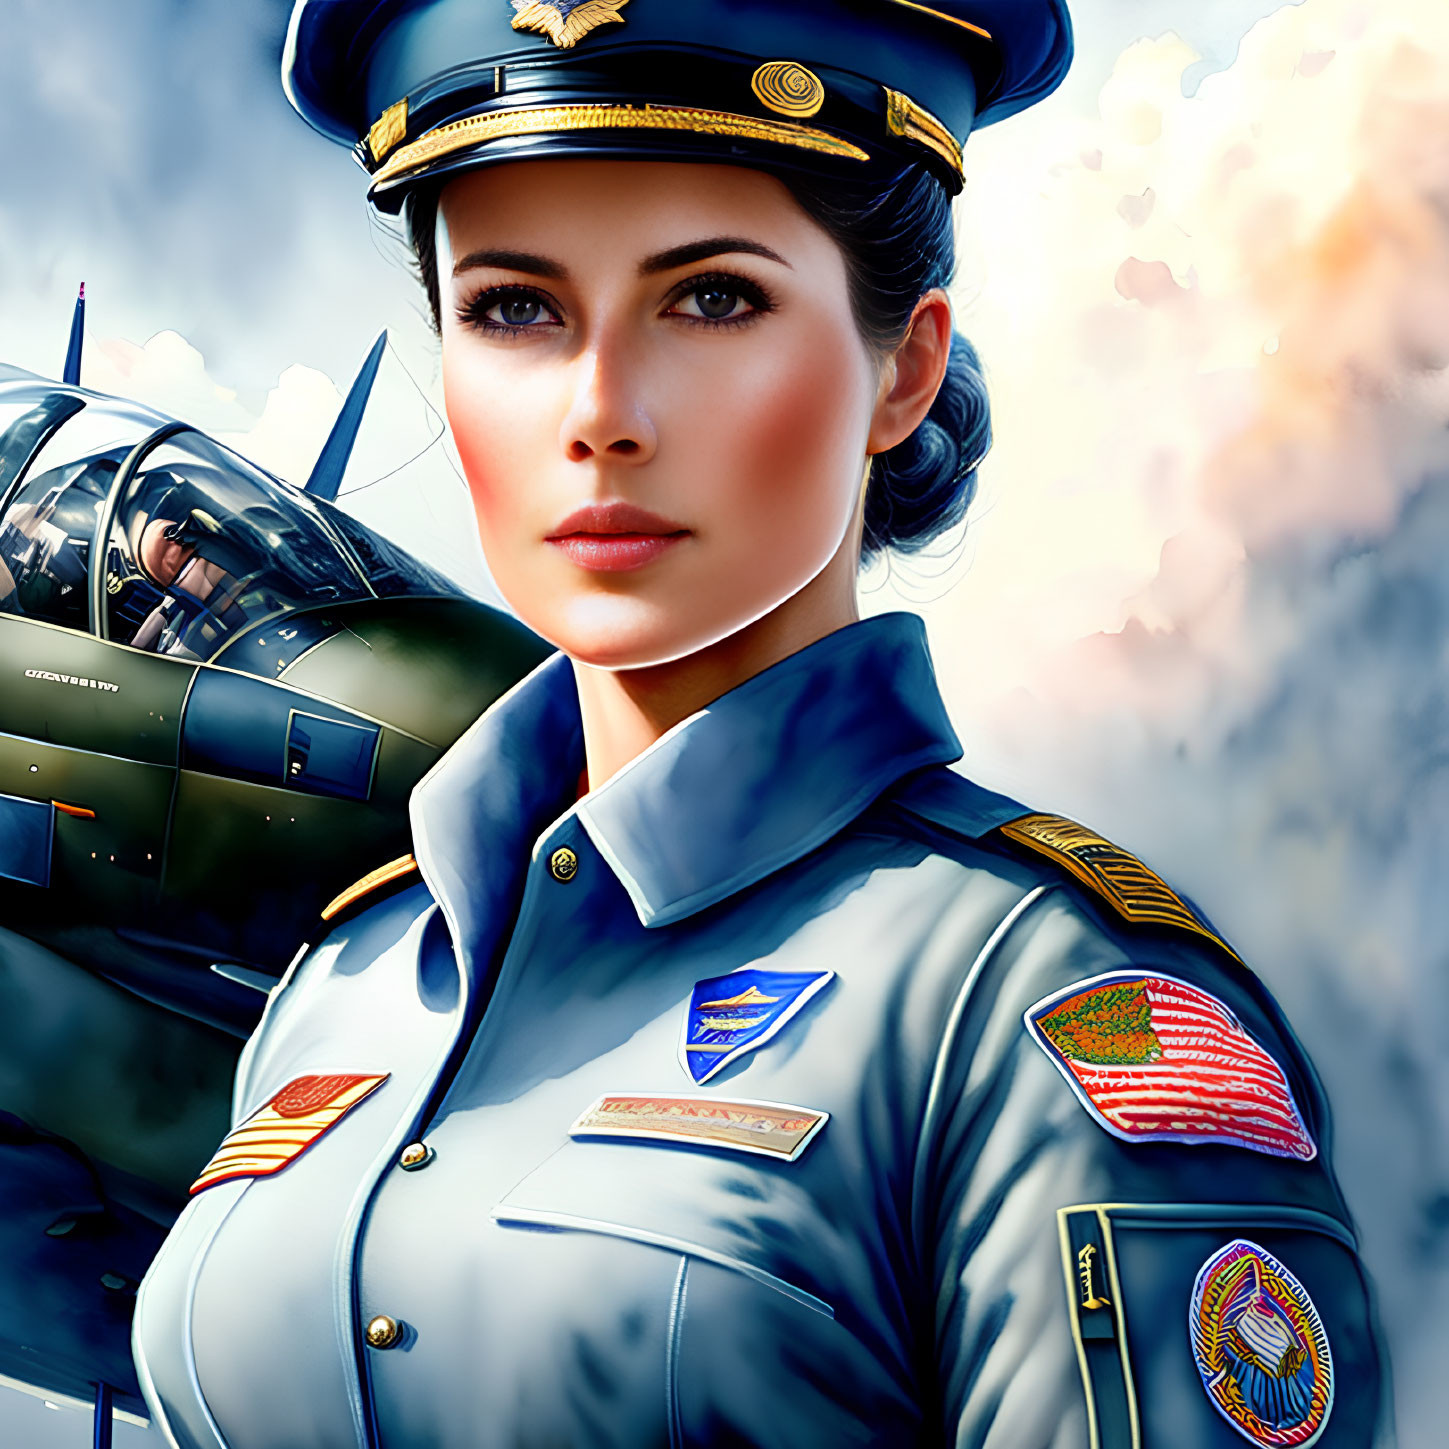 Digital artwork: Woman in military uniform with pilot wings and insignia, standing by airplane